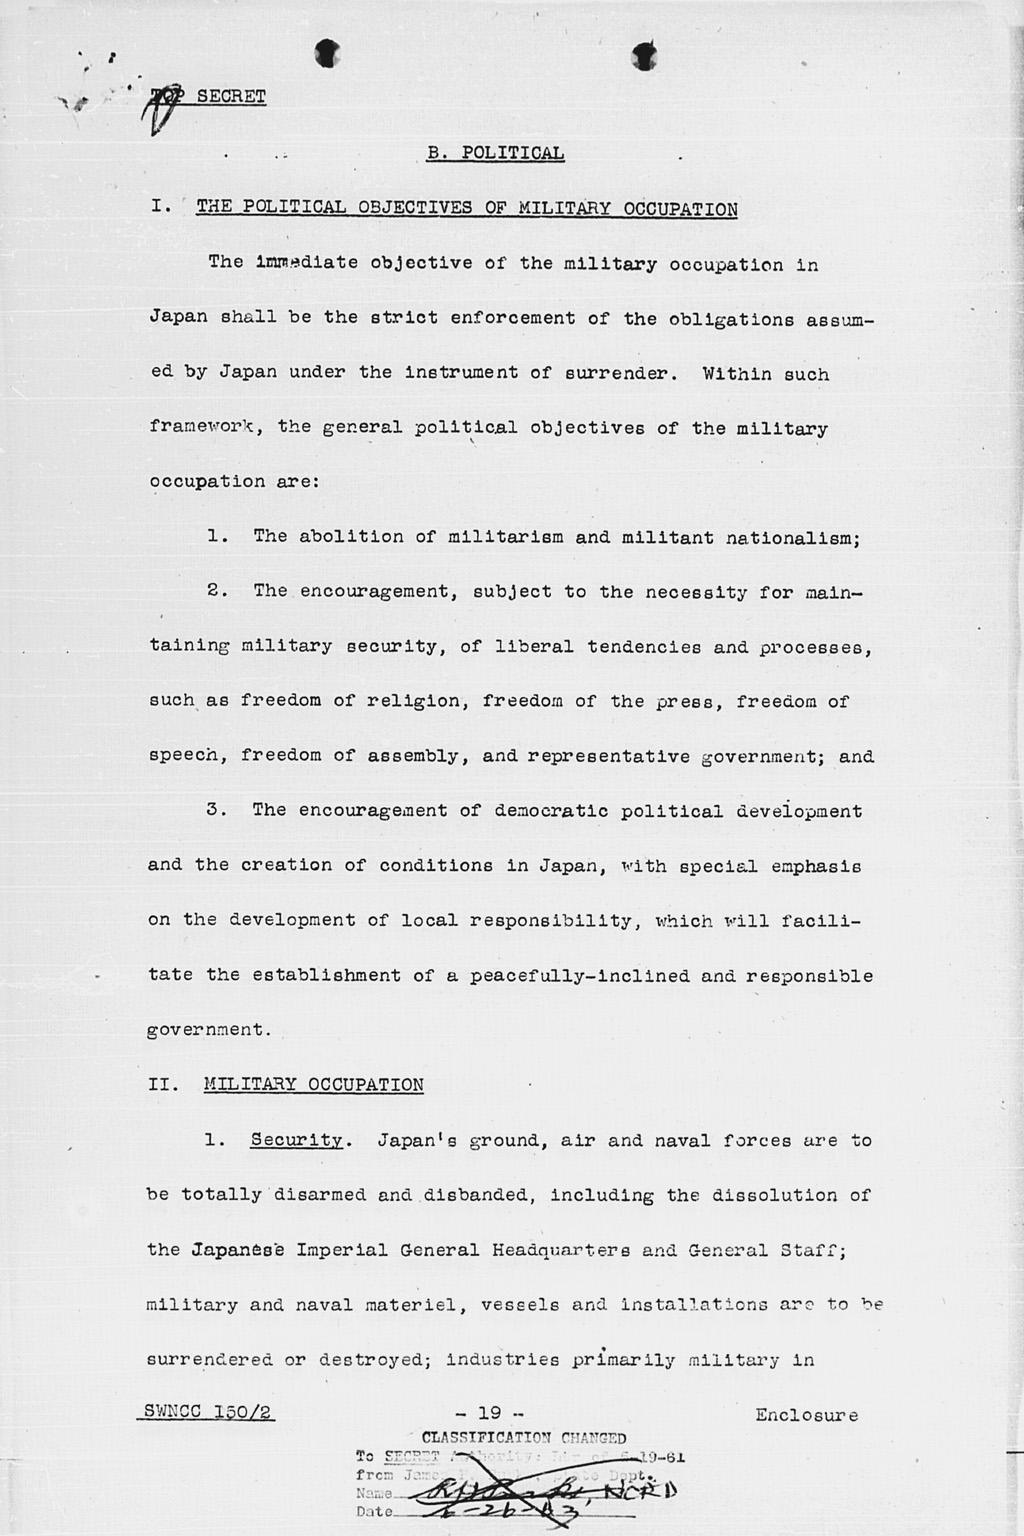 [United States Initial Post-Defeat Policy Relating to Japan (SWNCC150/2)](Larger image)